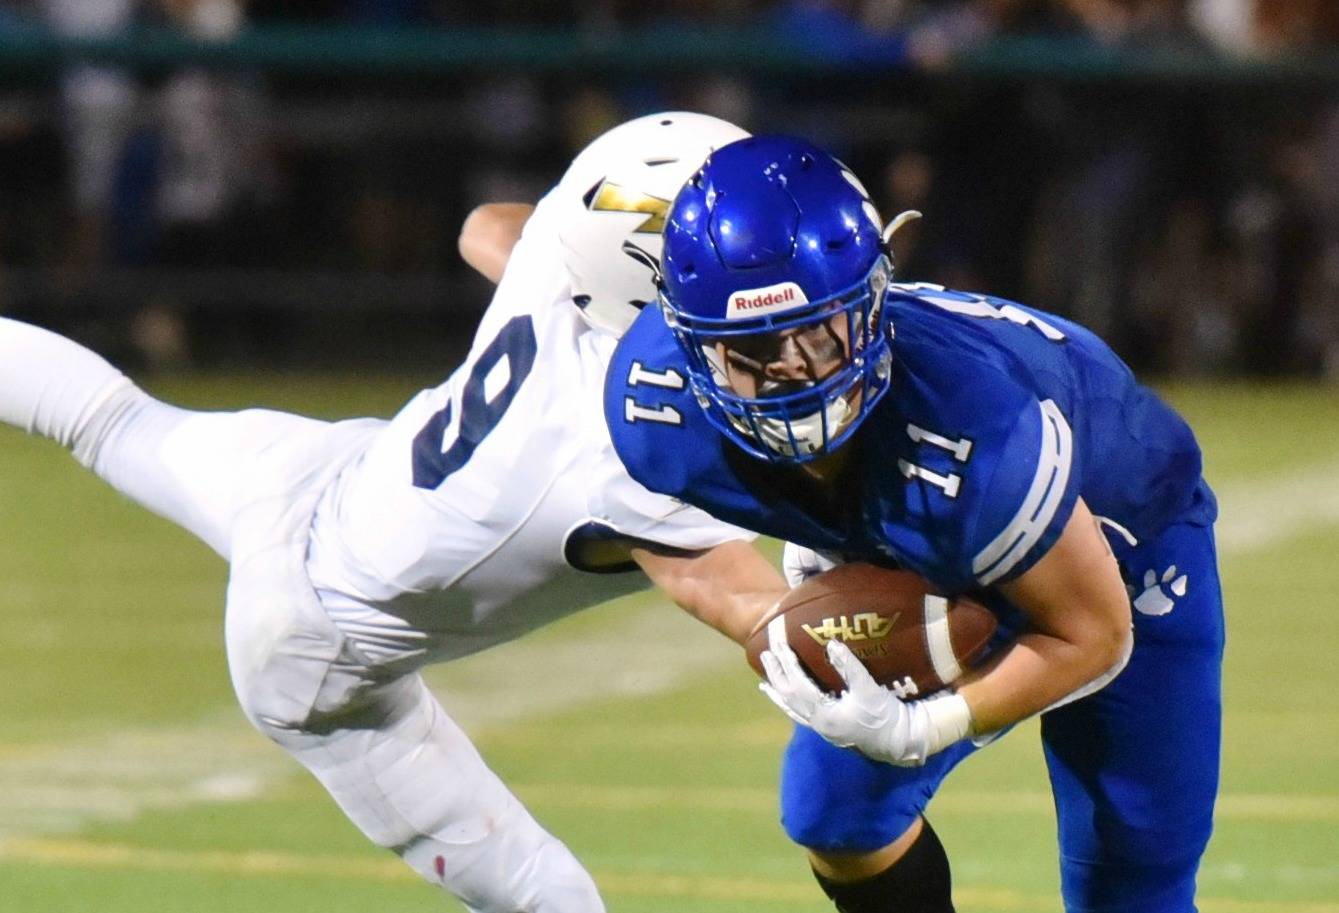 Bothell beats Legacy of Colorado in 425 Bowl